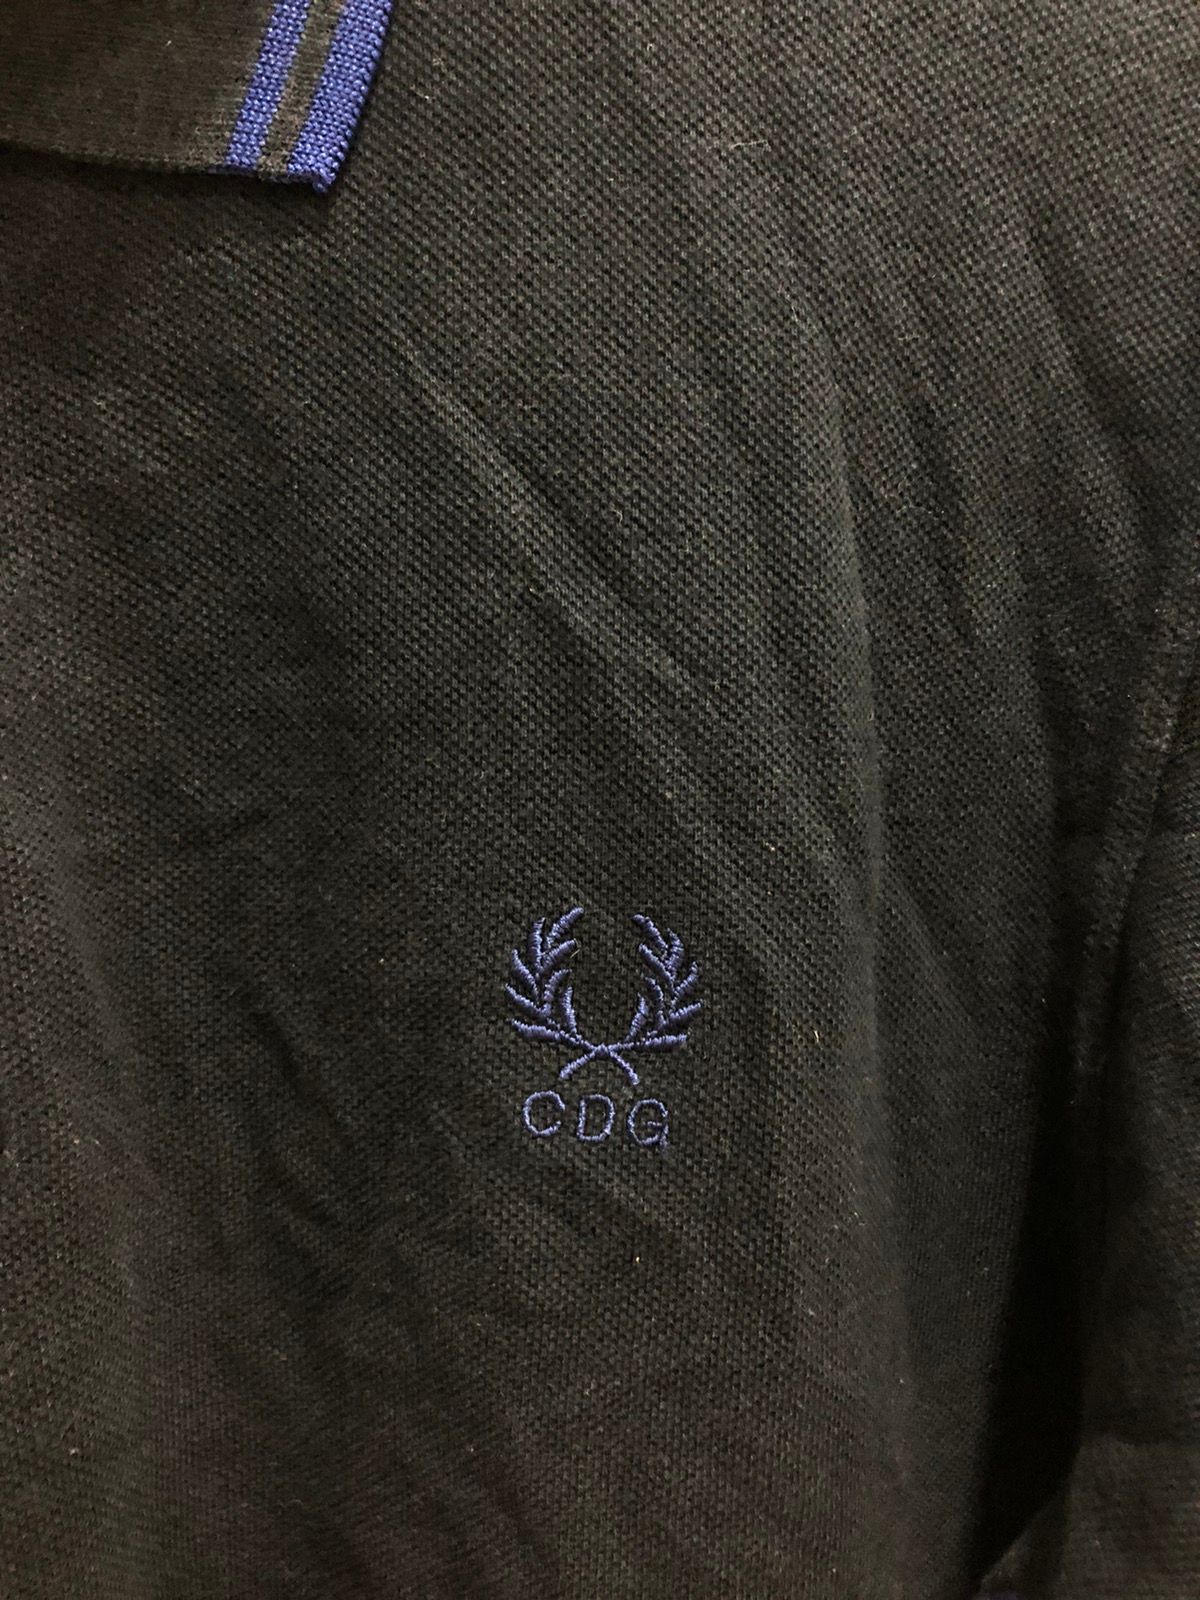 SS04 CDG x Fred Perry Polo Shirt - 6